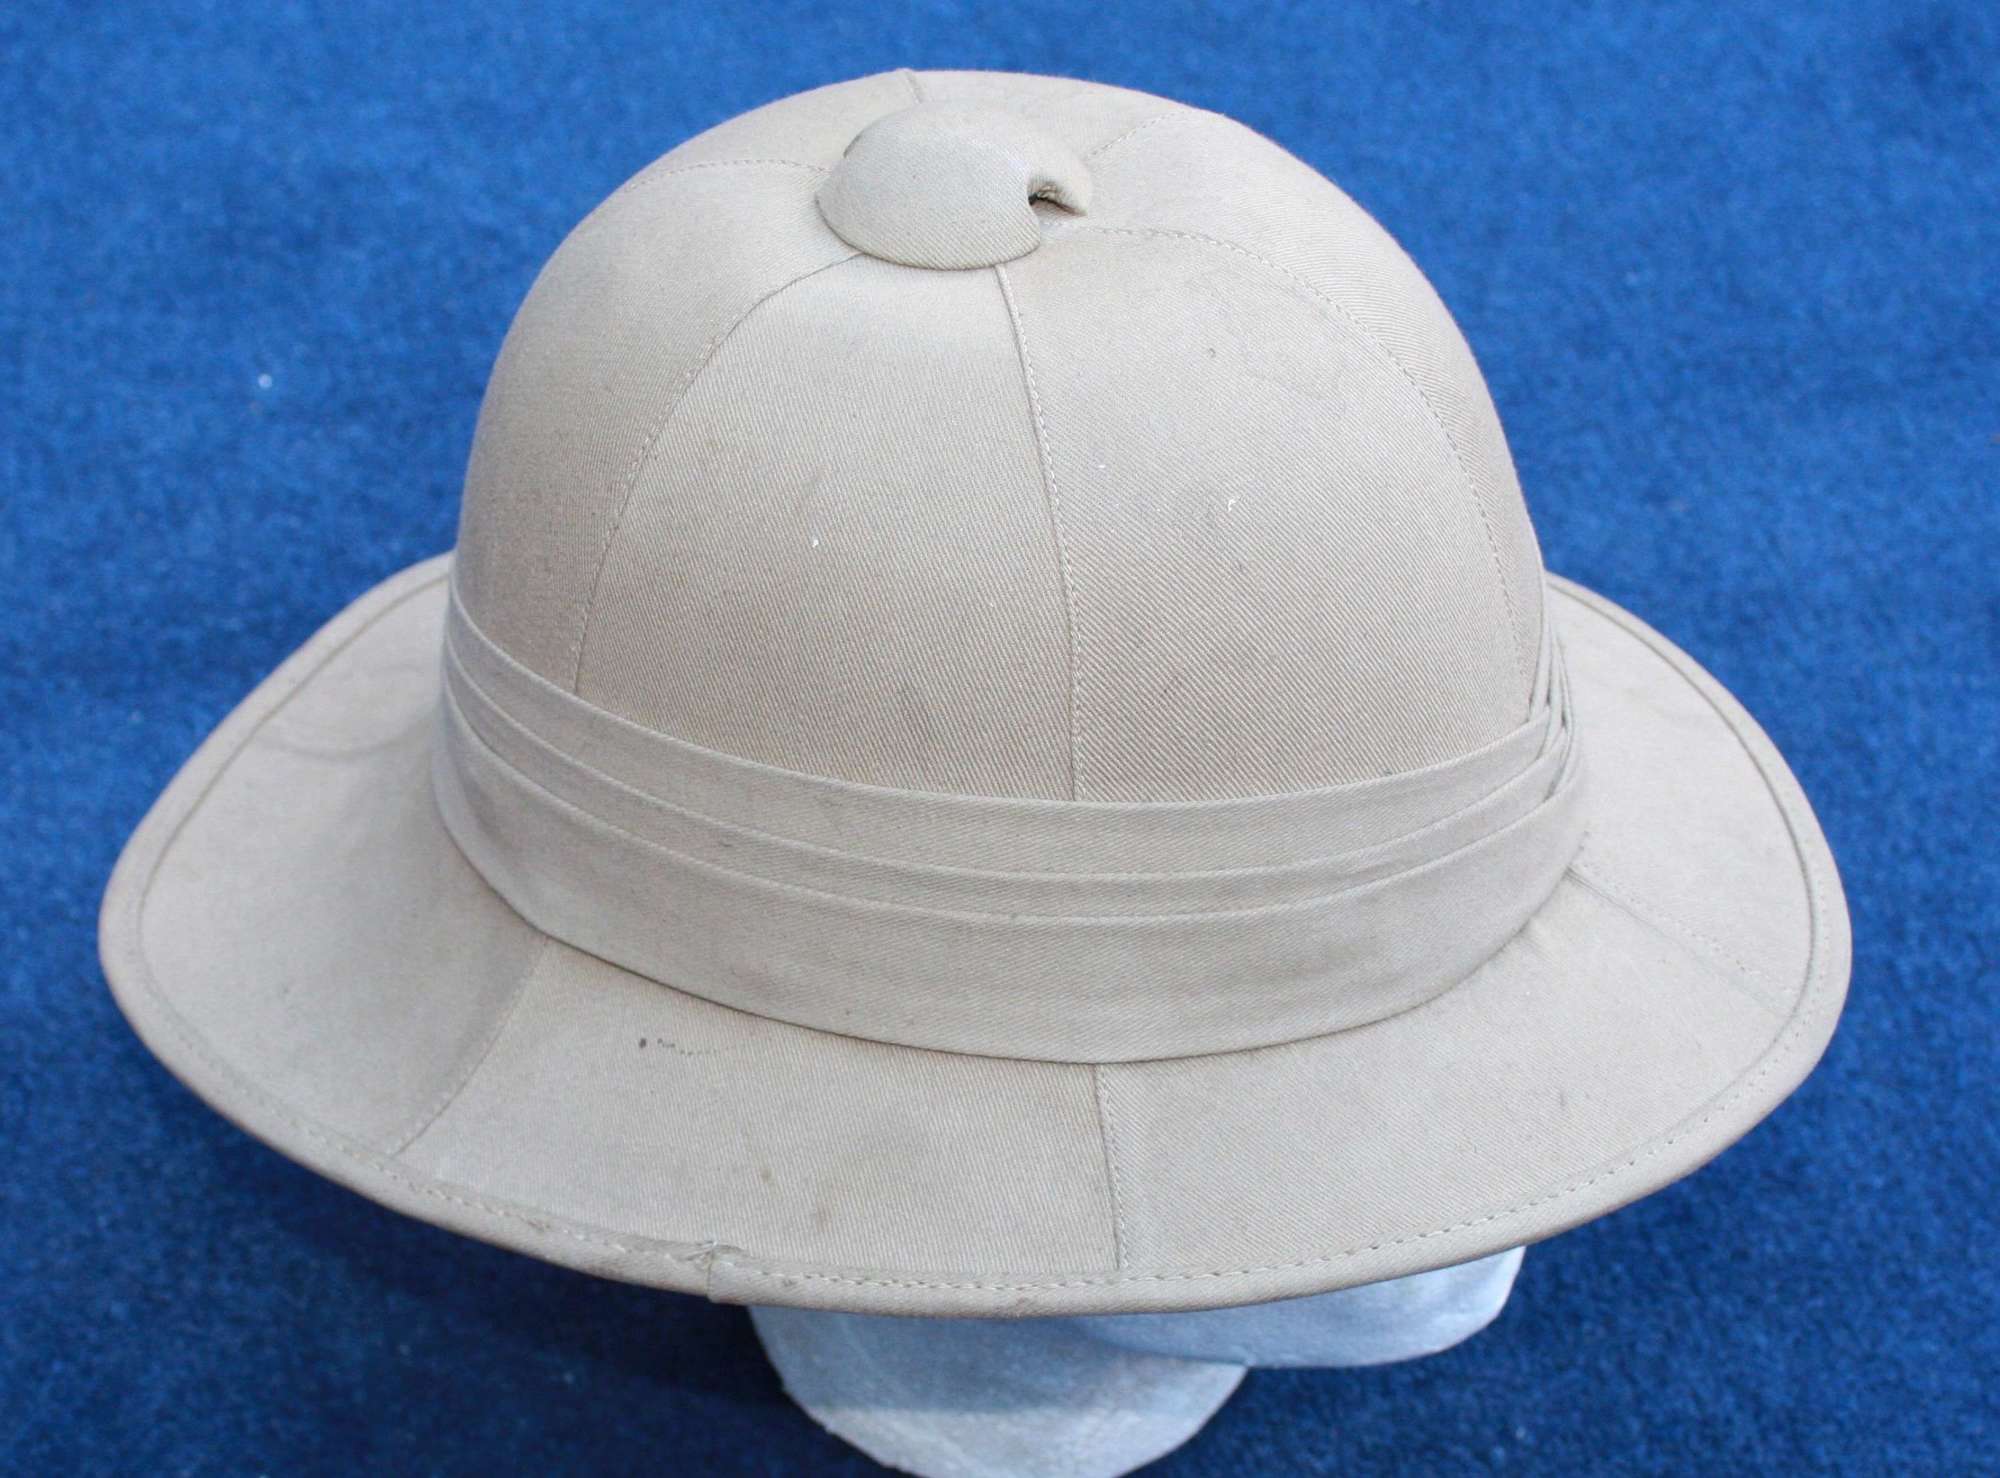 EARLY WW2 BRITISH ARMY OTHER RANKS PITH HELMET & HAT BAG.